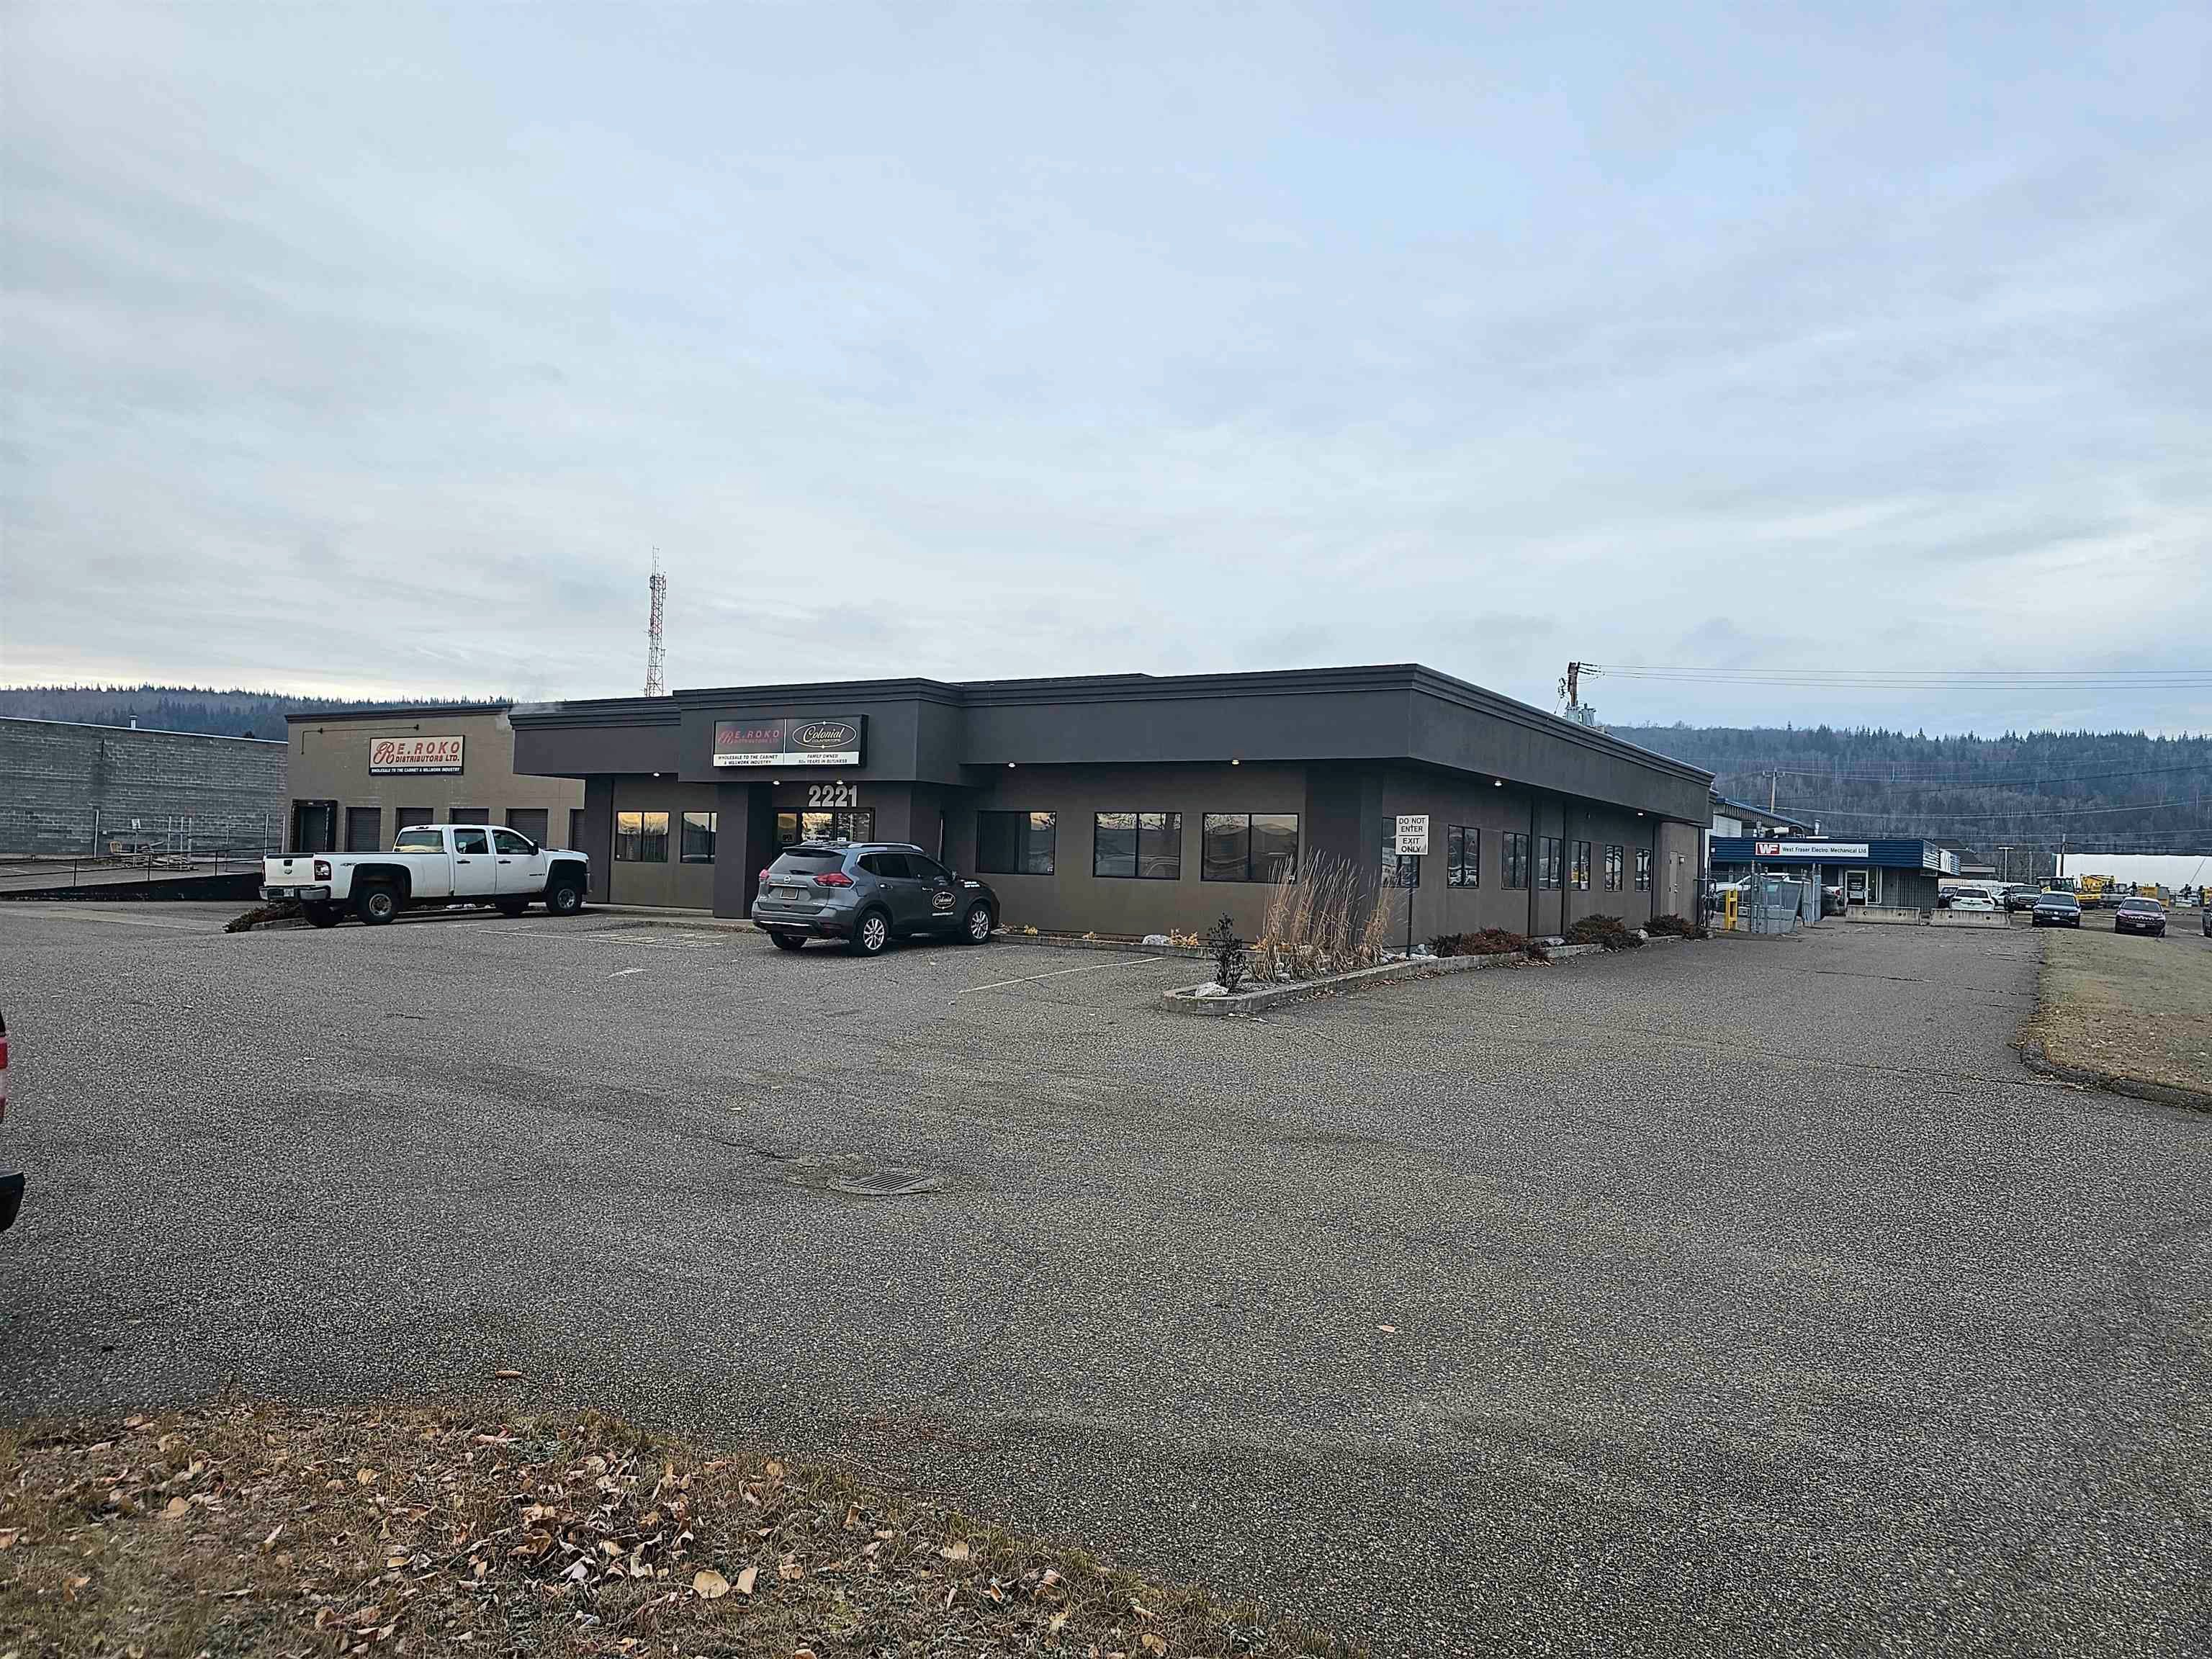 Main Photo: 2221 QUINN Street in Prince George: Carter Light Industrial Industrial for sale (PG City West)  : MLS®# C8056003